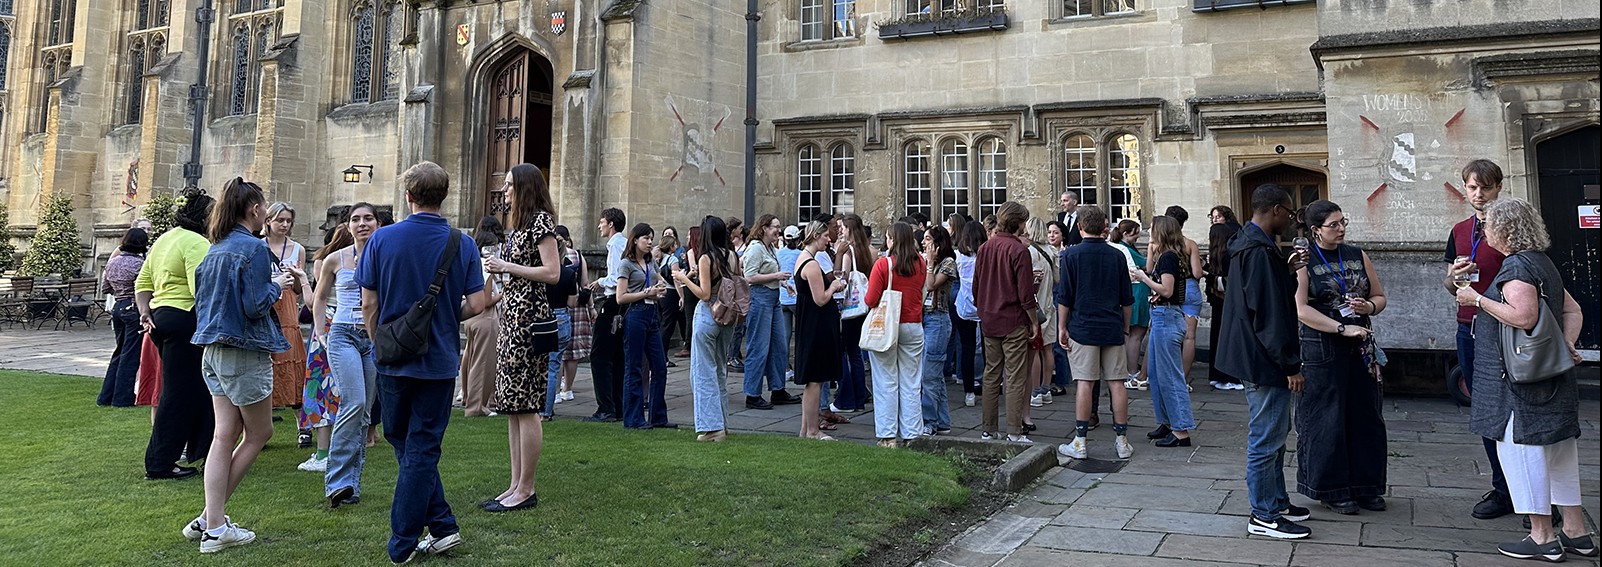 Students socializing on the front quod of Exeter College in front of the college's dining hall.